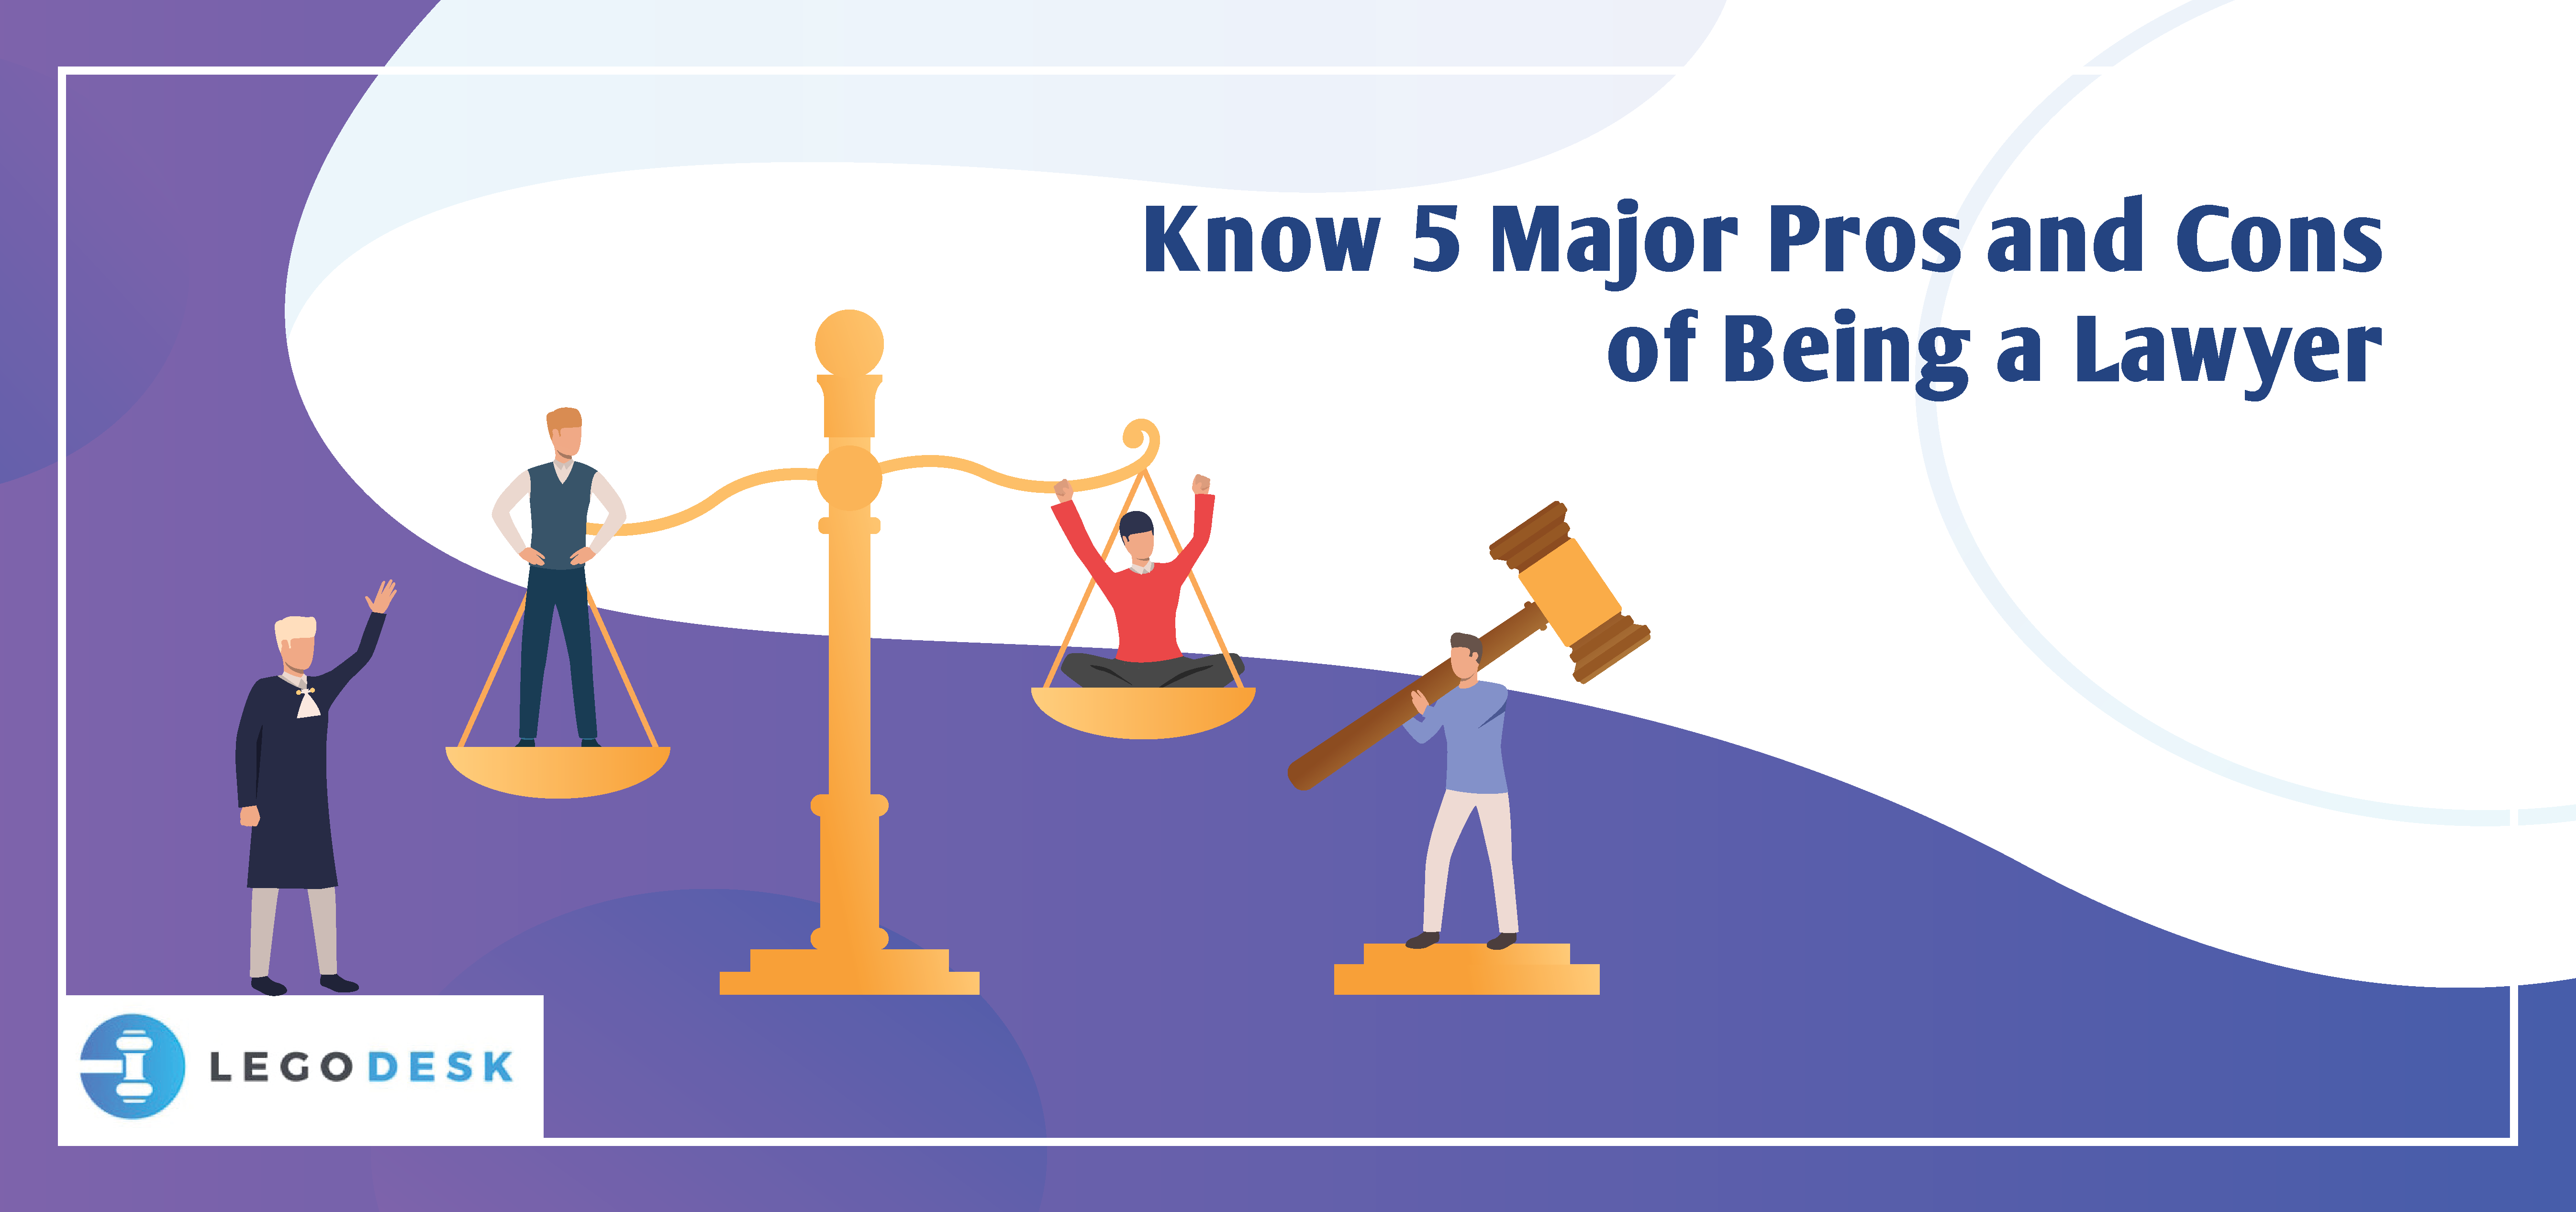 Know 5 Major Pros and Cons of Being a Lawyer